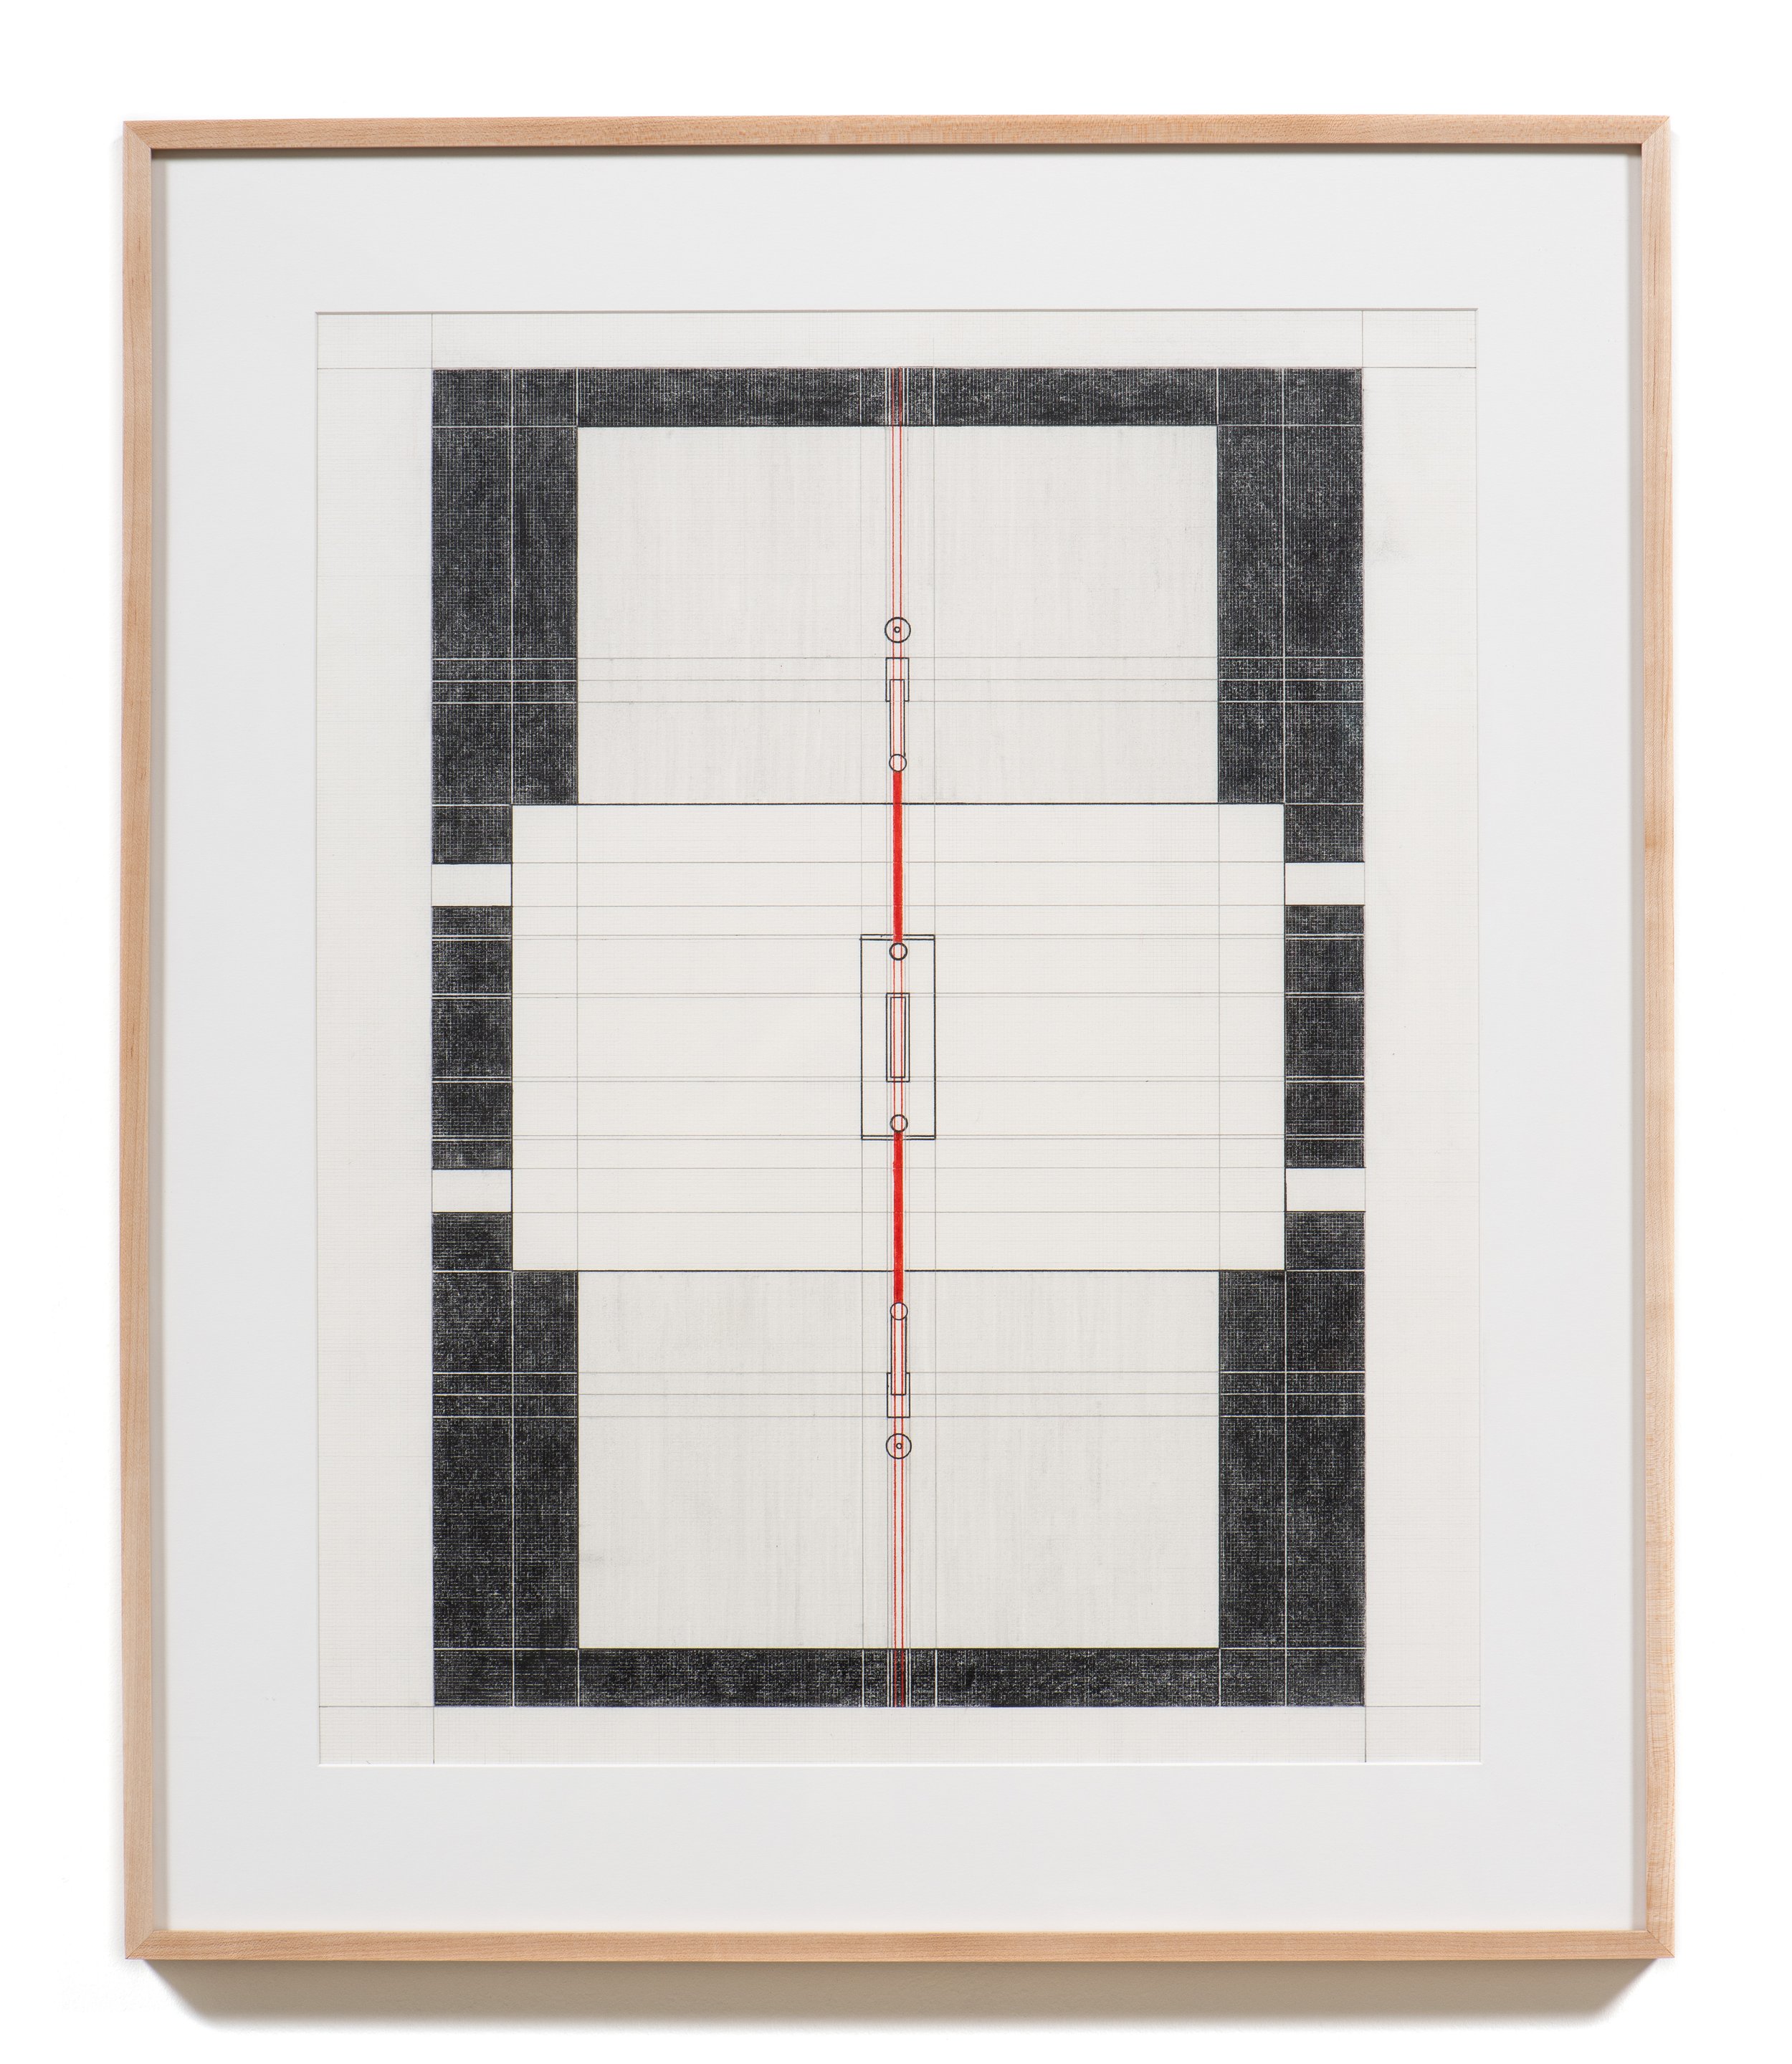   Ferguson Perforations , 2021 Graphite and colored pencil on paper 36 x 31 x 1 1/2 inches (framed) 